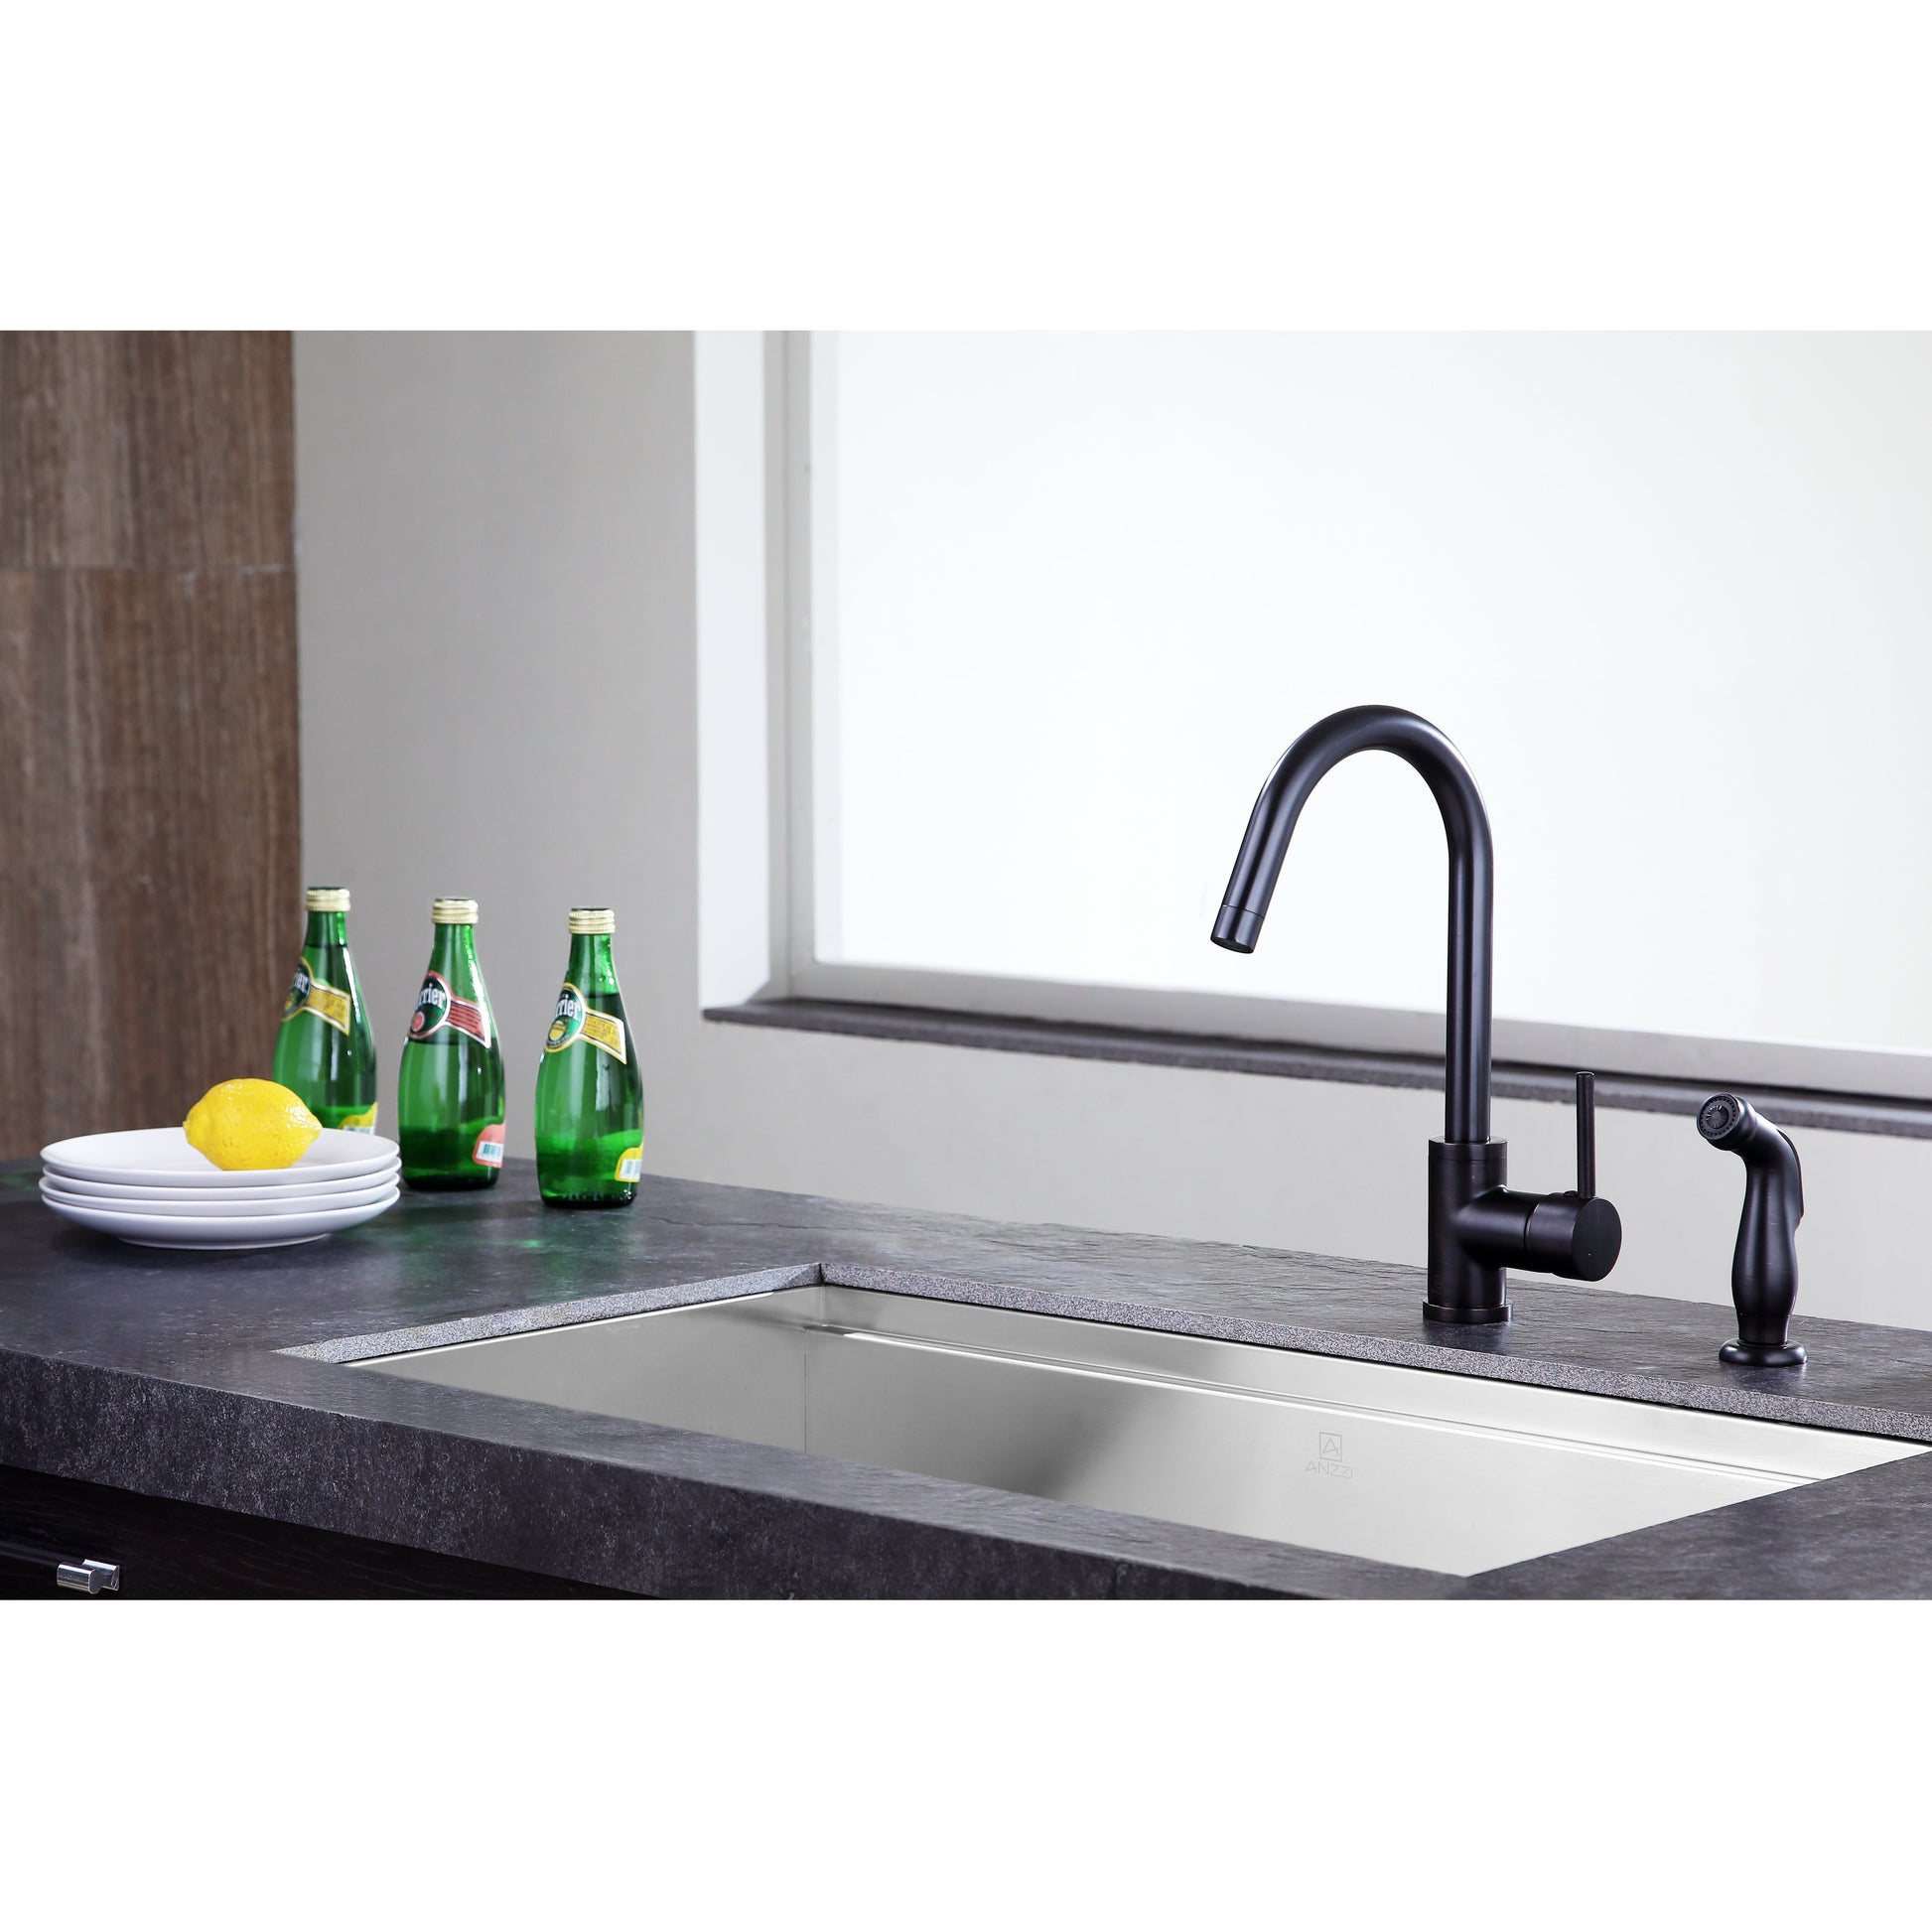 ANZZI Farnese Series Single Hole Oil Rubbed Bronze Kitchen Faucet With Euro-Grip Pull Out Sprayer